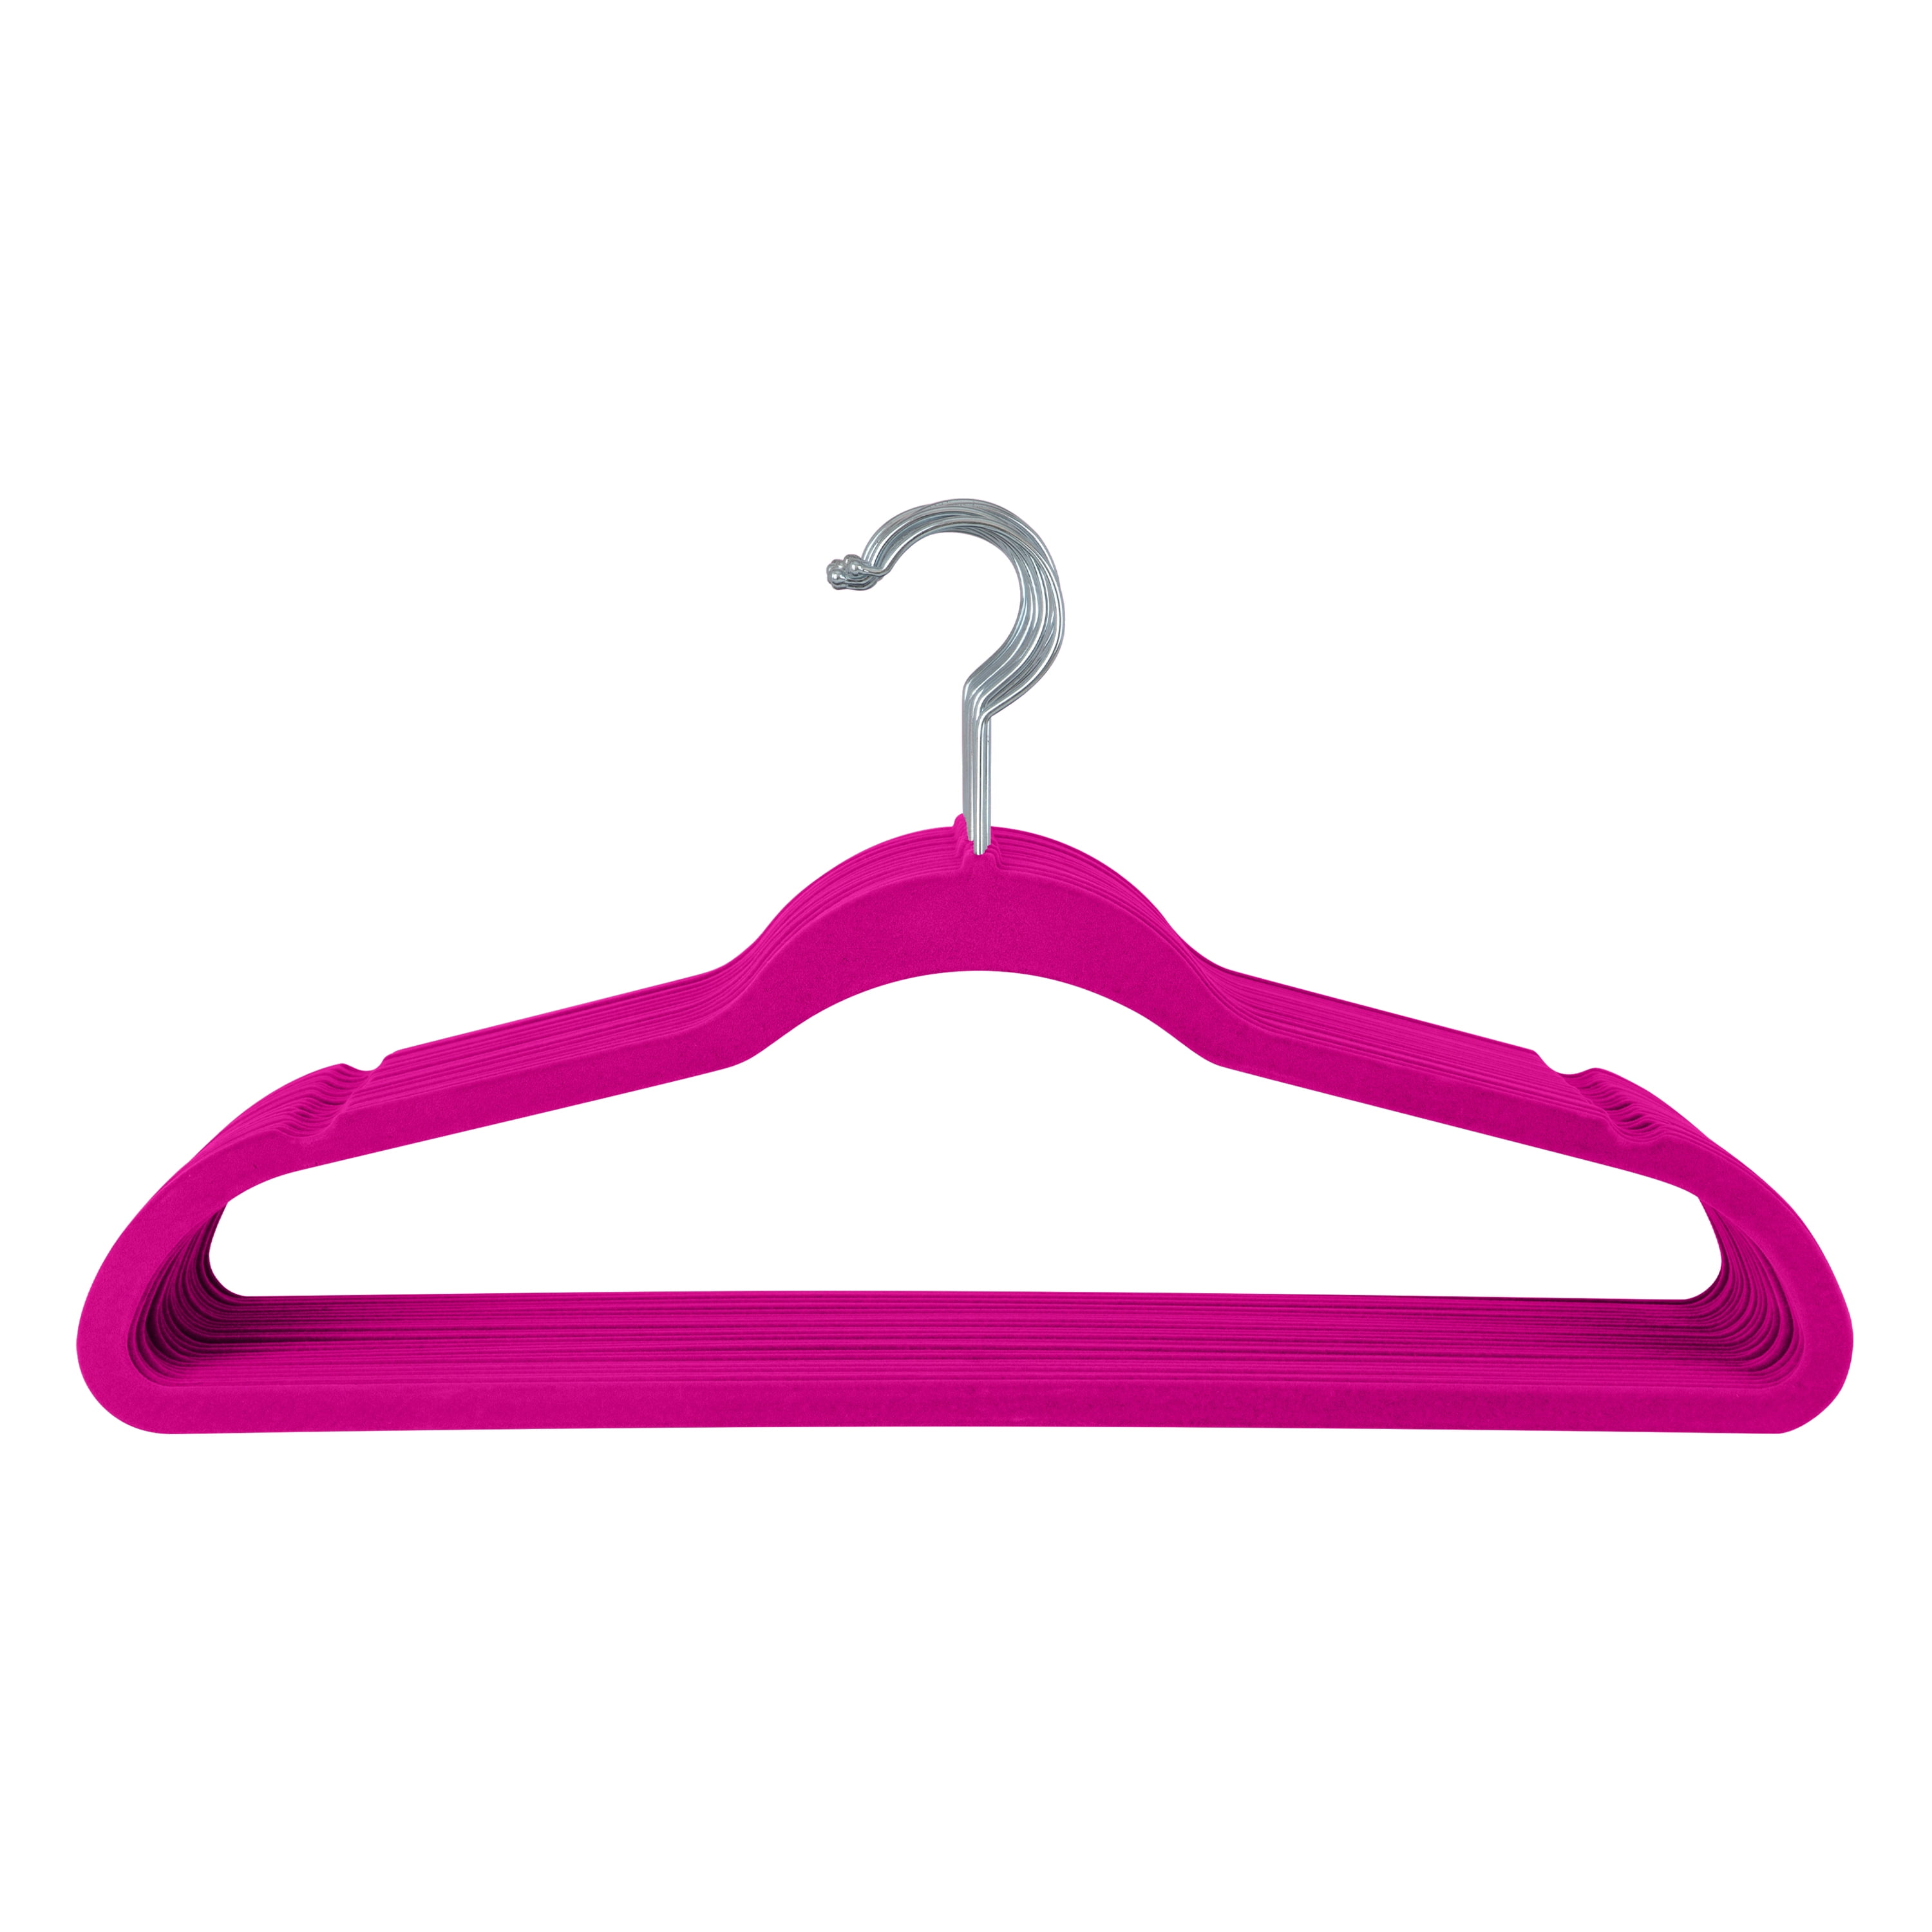 Adult Clothes Hangers PINK 5 Pack - Dollar Store